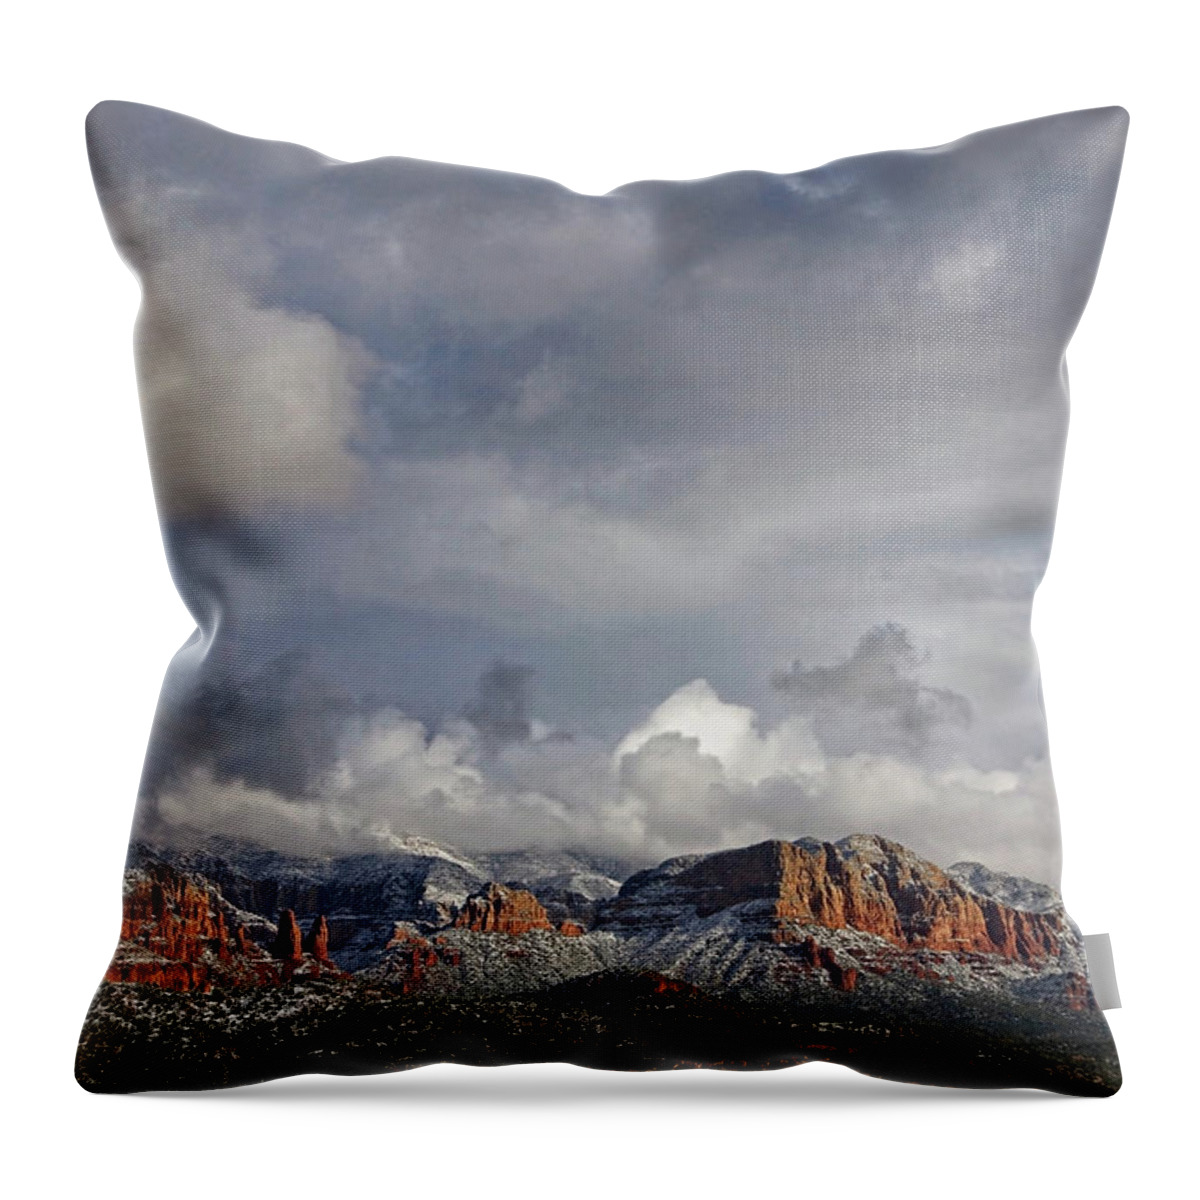 Redrockformations Throw Pillow featuring the photograph Red Rocks of Sedona by Theo